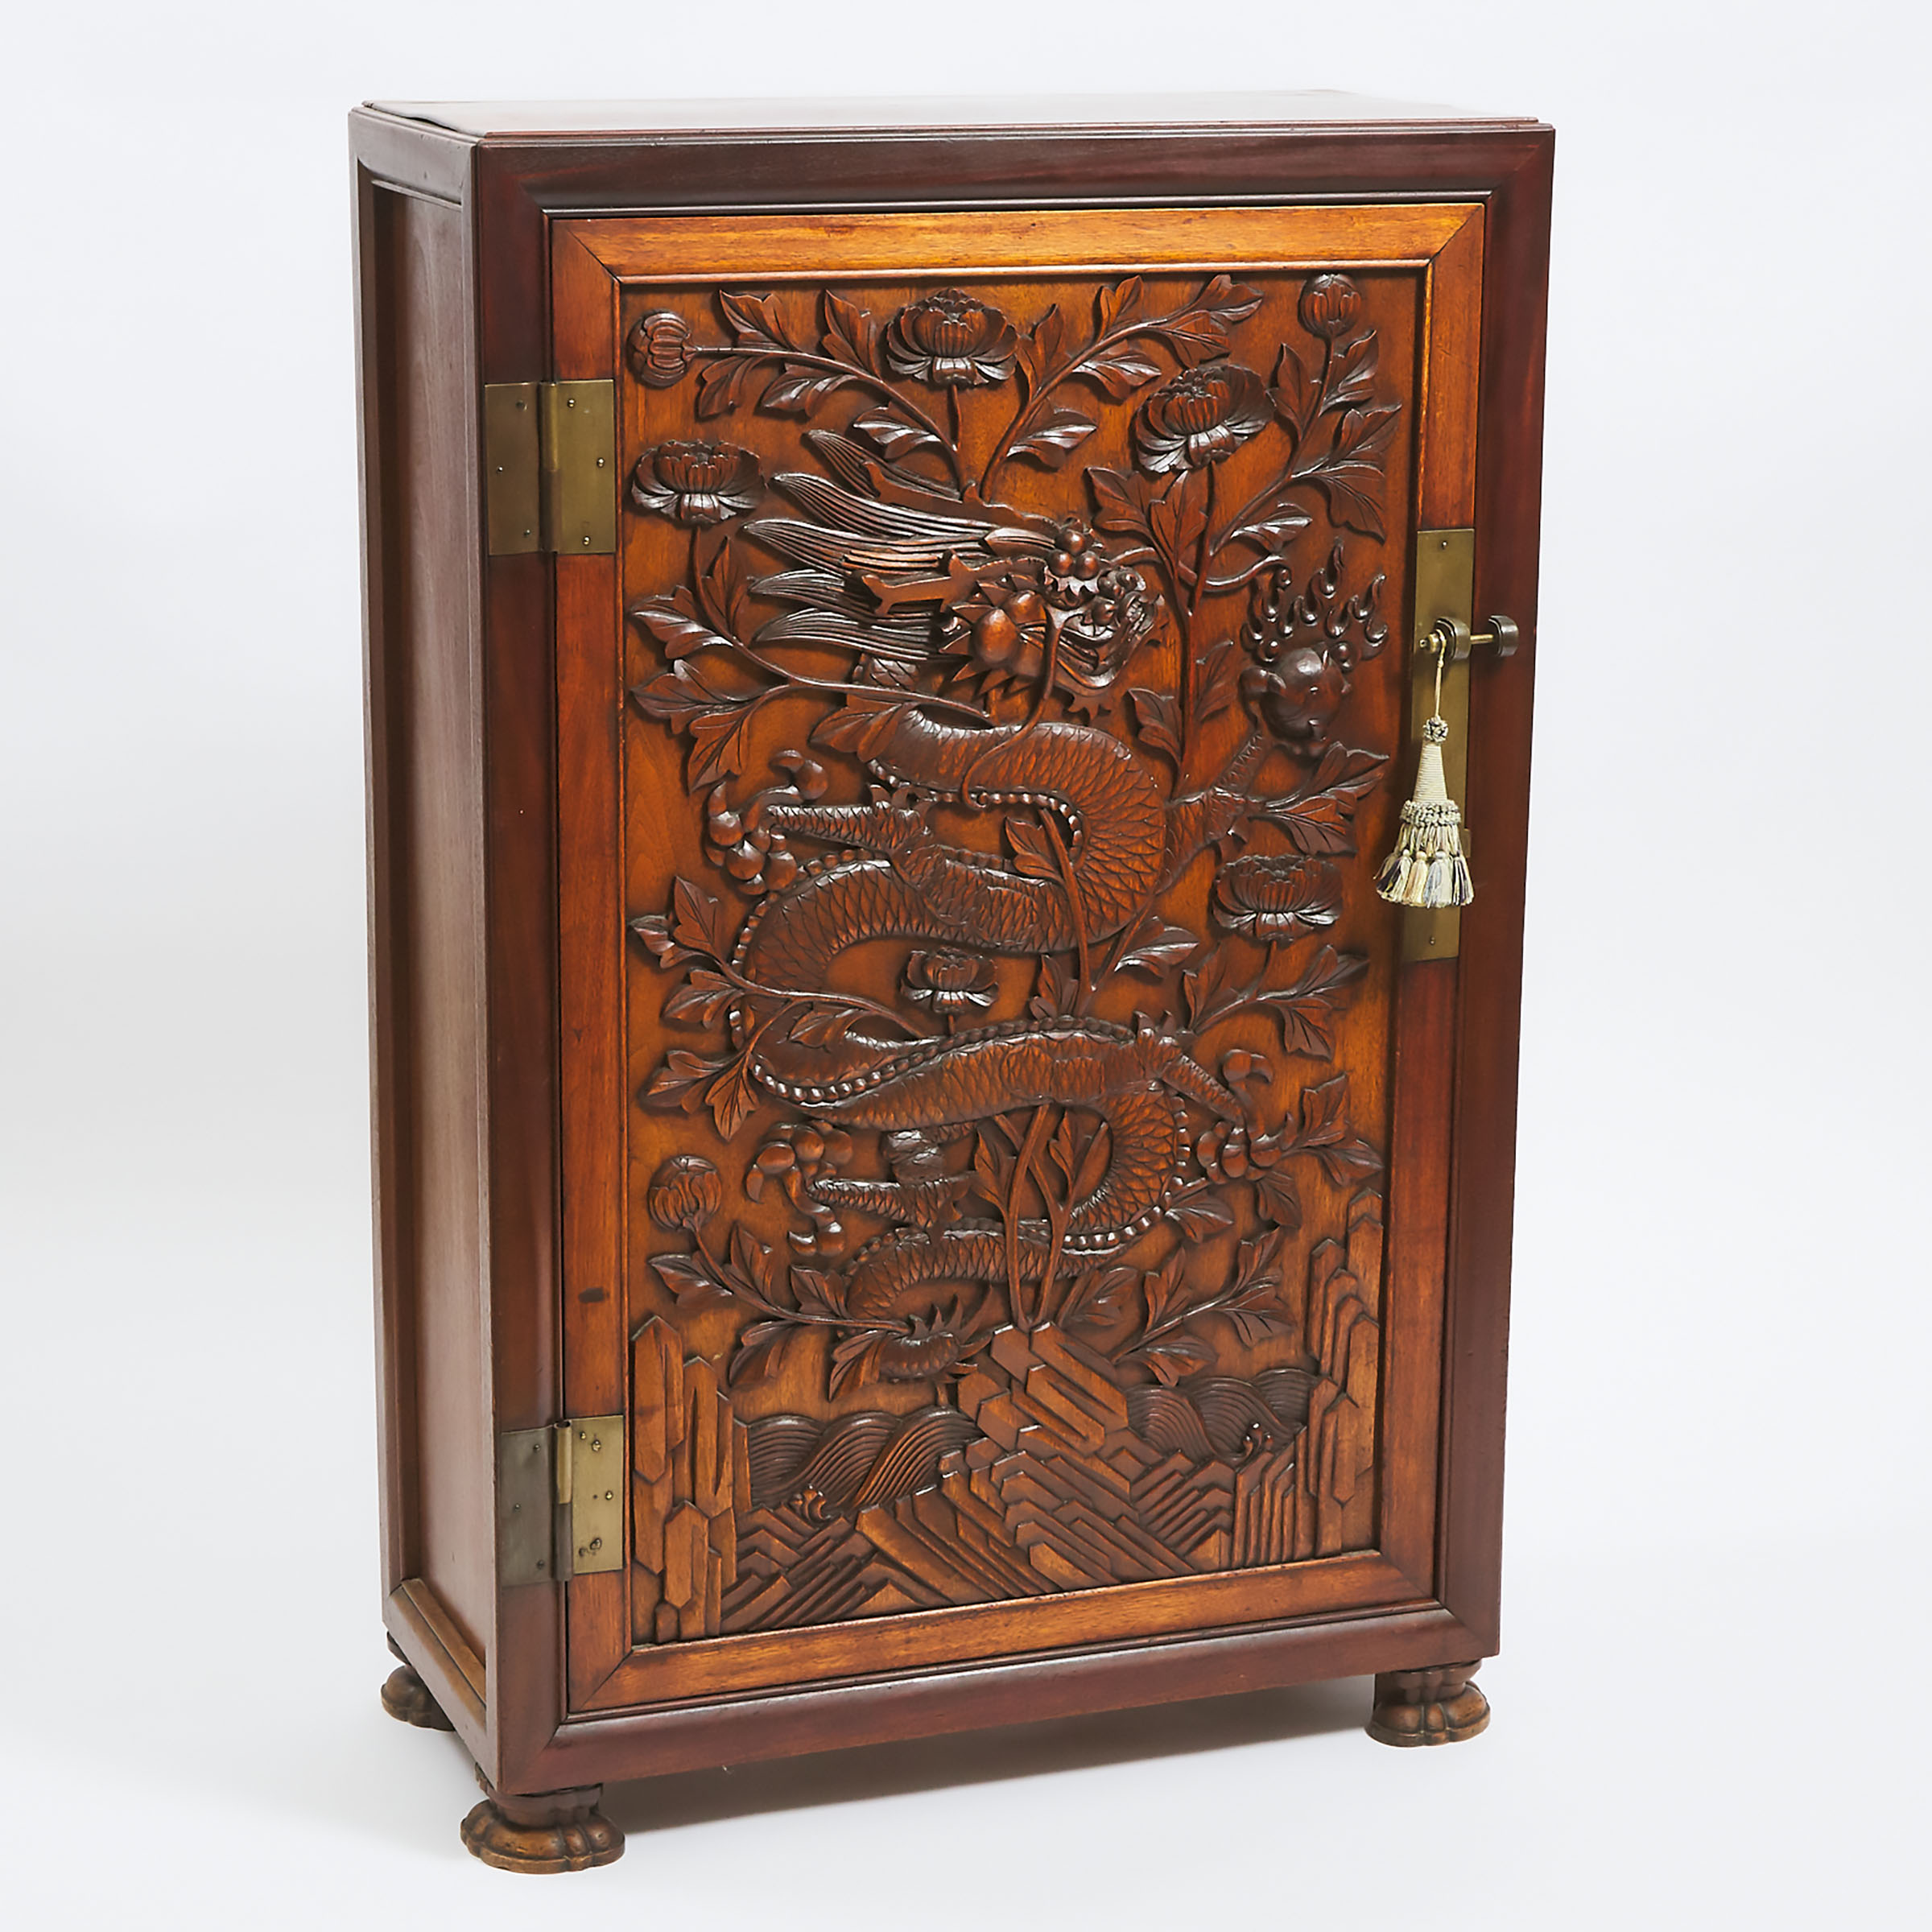 A Chinese Carved Rosewood 'Dragon' Cabinet, Early to Mid 20th Century